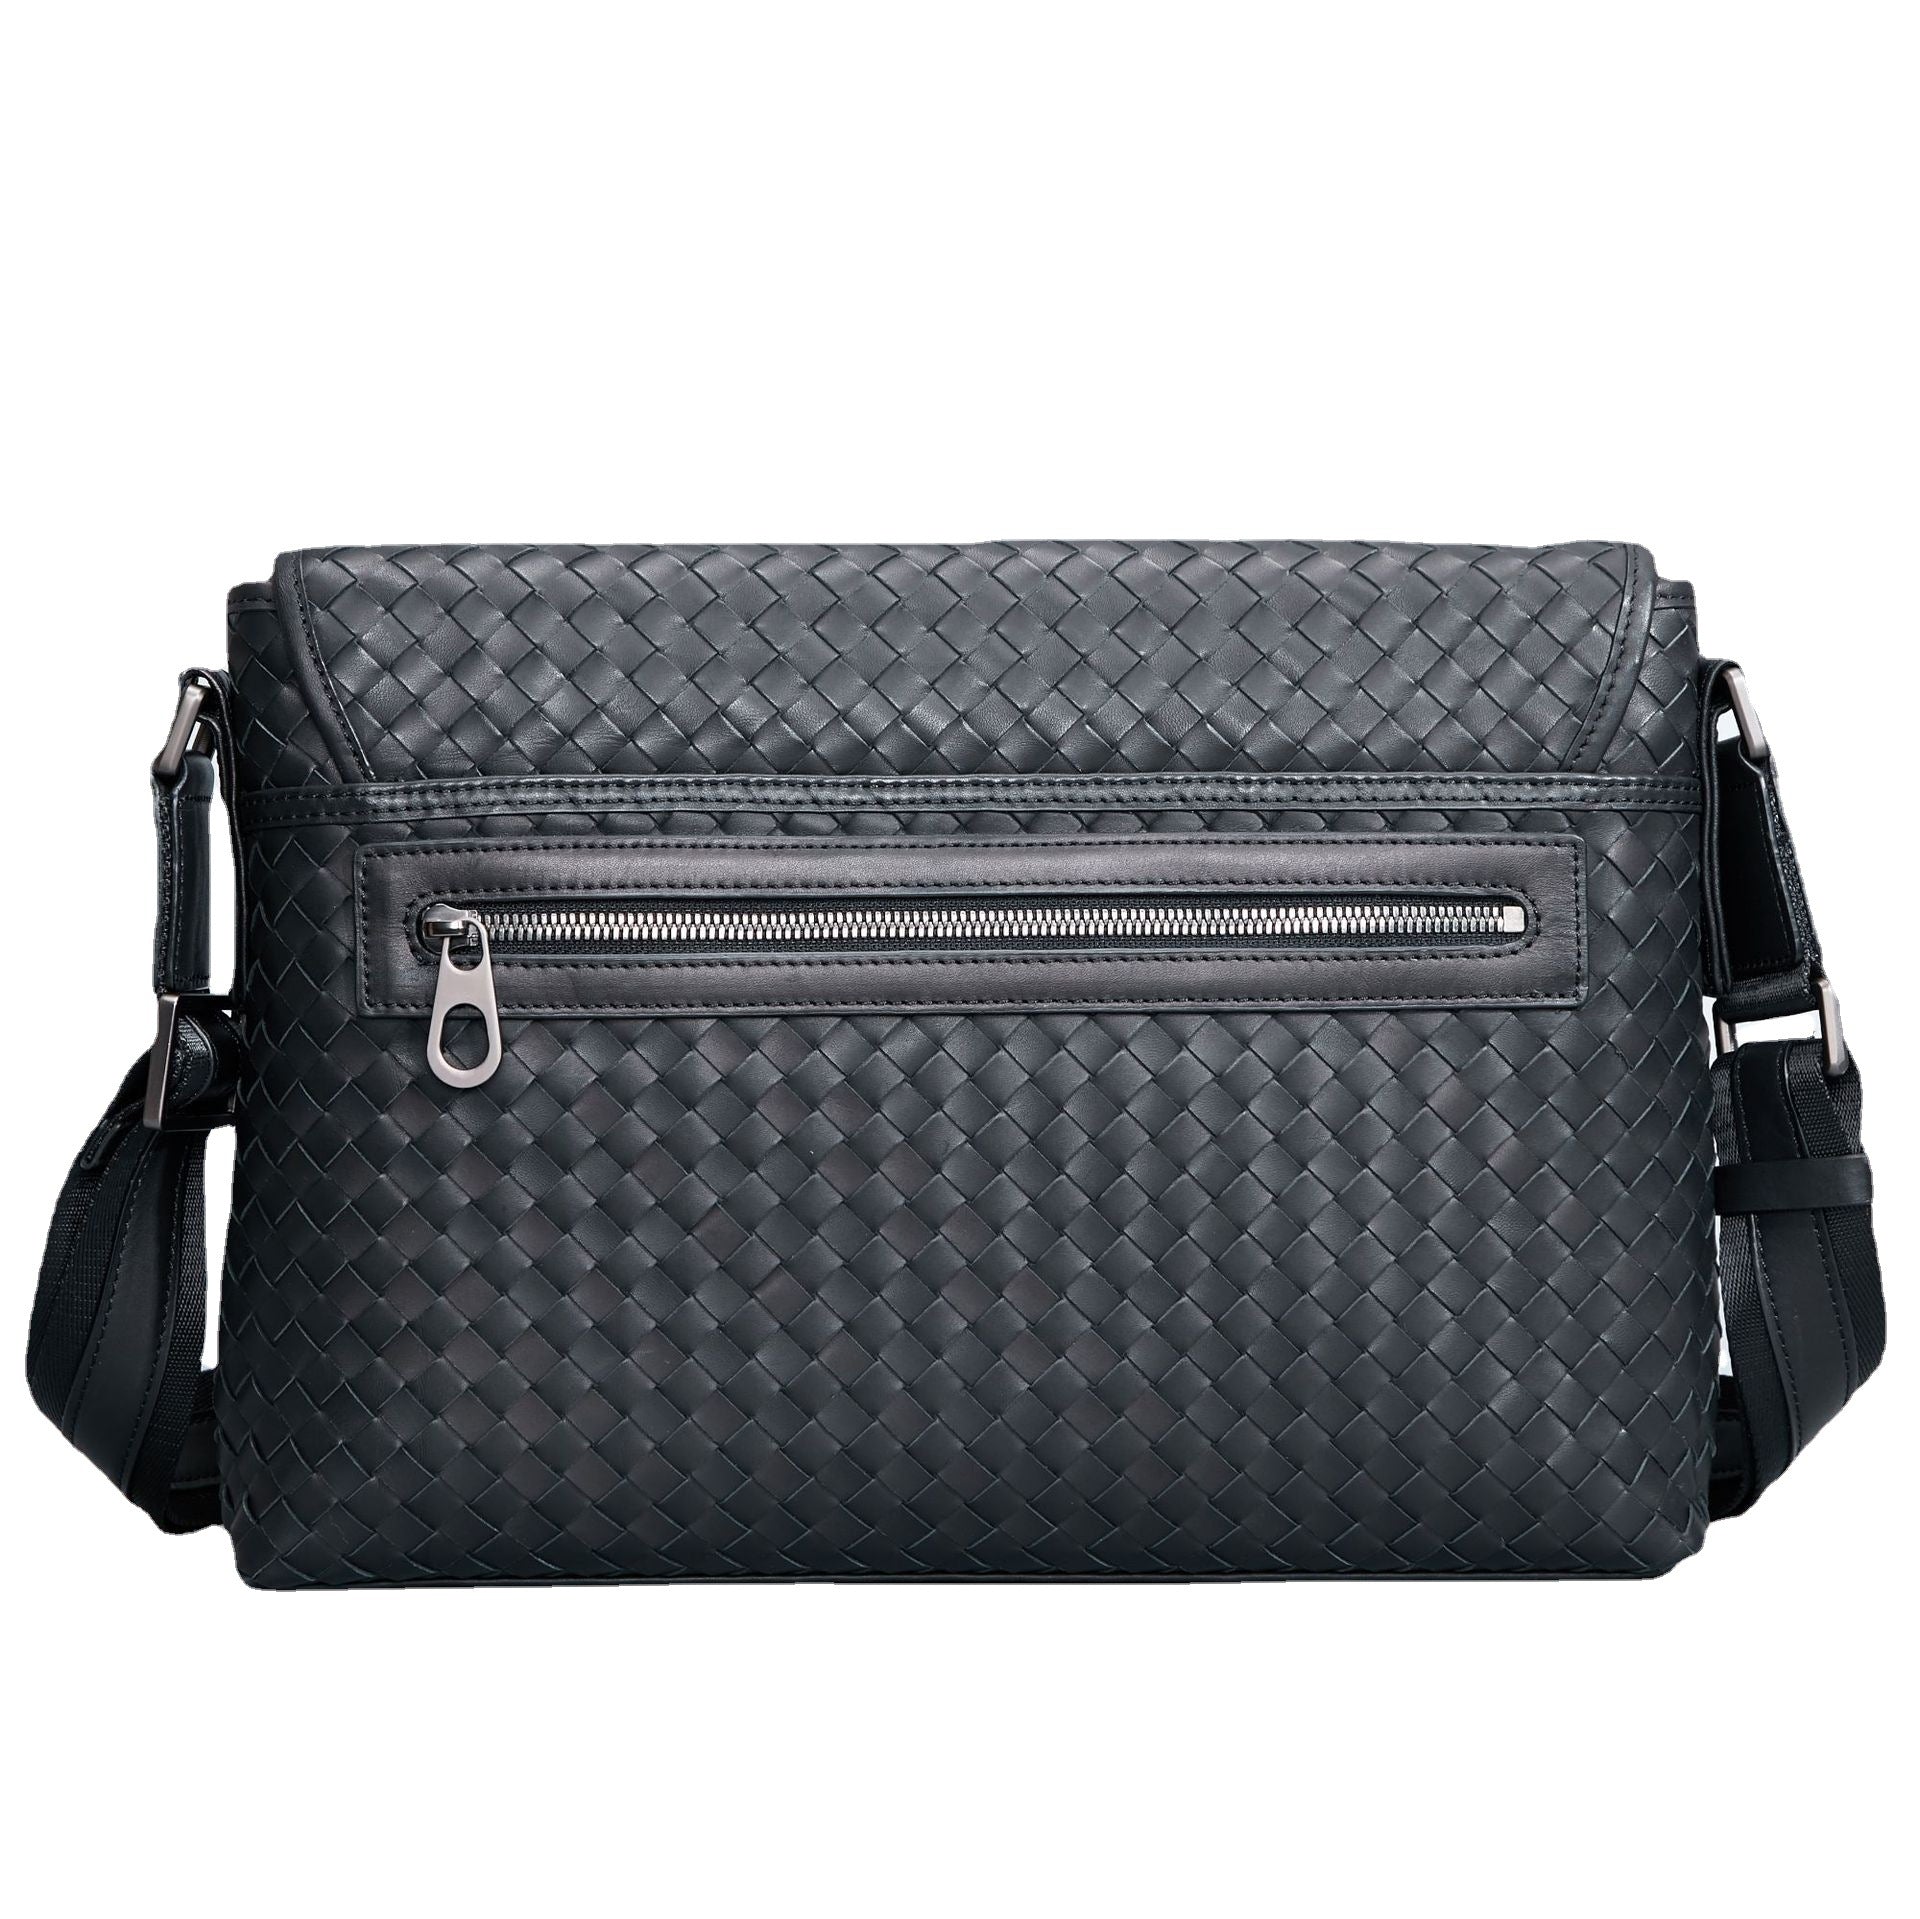 Men's Business Casual Leather Woven Messenger Bag